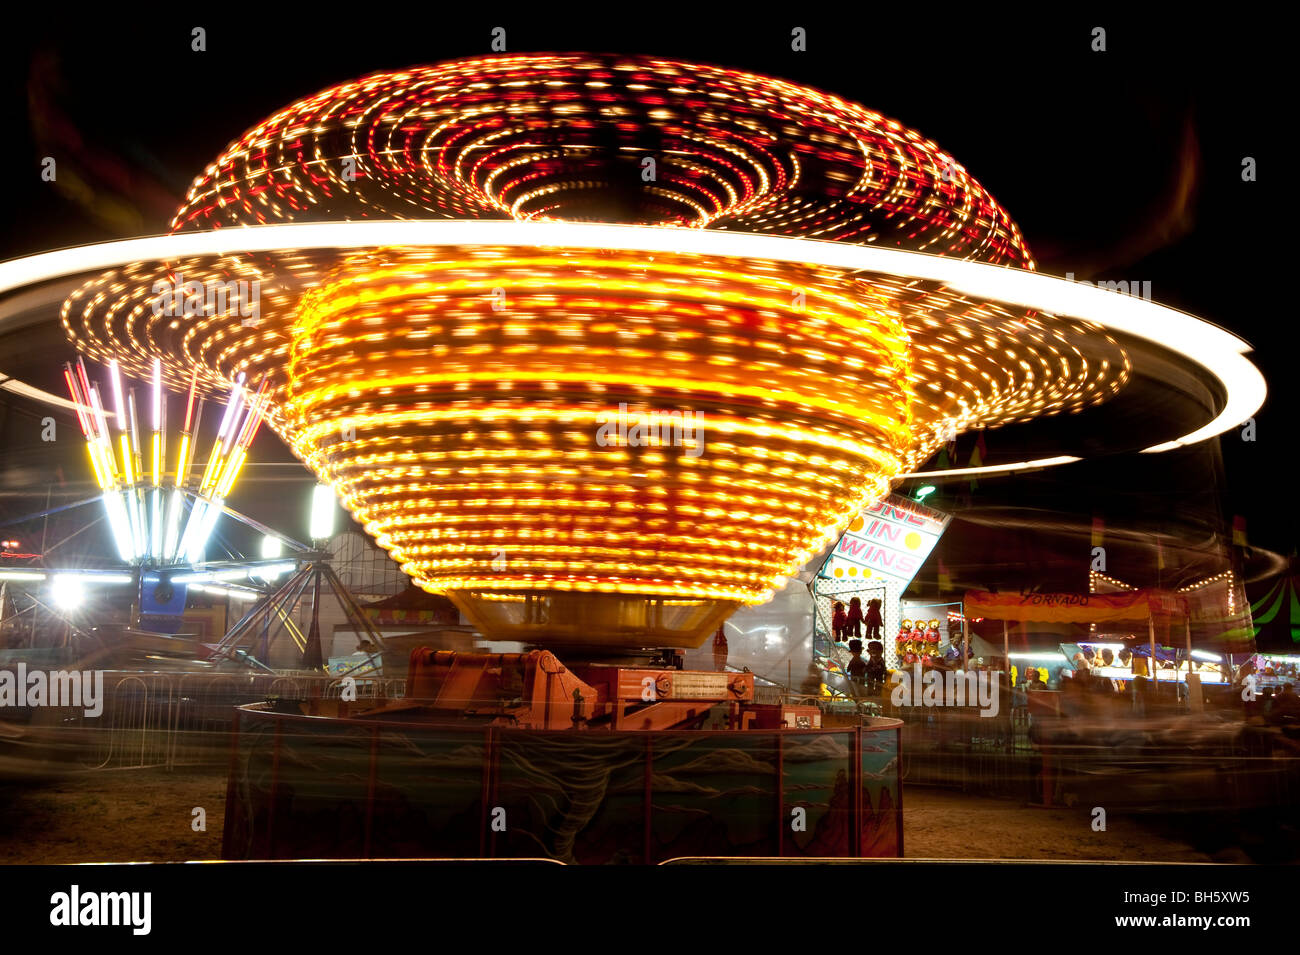 Swirling lights of carnival rides at night. Stock Photo